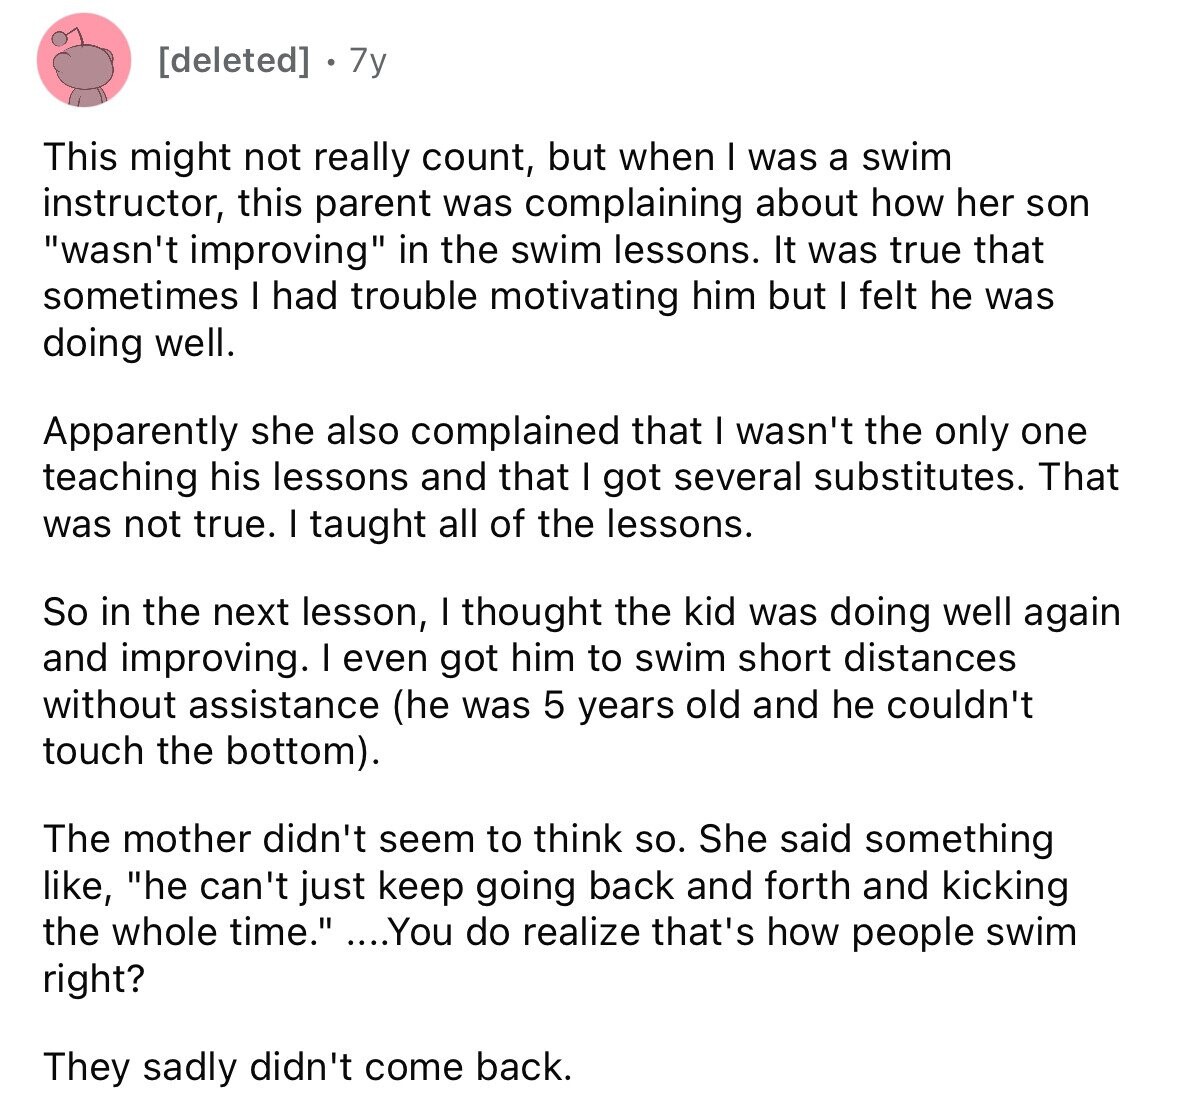 [deleted] 7y This might not really count, but when I was a swim instructor, this parent was complaining about how her son wasn't improving in the swim lessons. It was true that sometimes I had trouble motivating him but I felt he was doing well. Apparently she also complained that I wasn't the only one teaching his lessons and that I got several substitutes. That was not true. I taught all of the lessons. So in the next lesson, I thought the kid was doing well again and improving. I even got him to swim short distances without assistance (he 